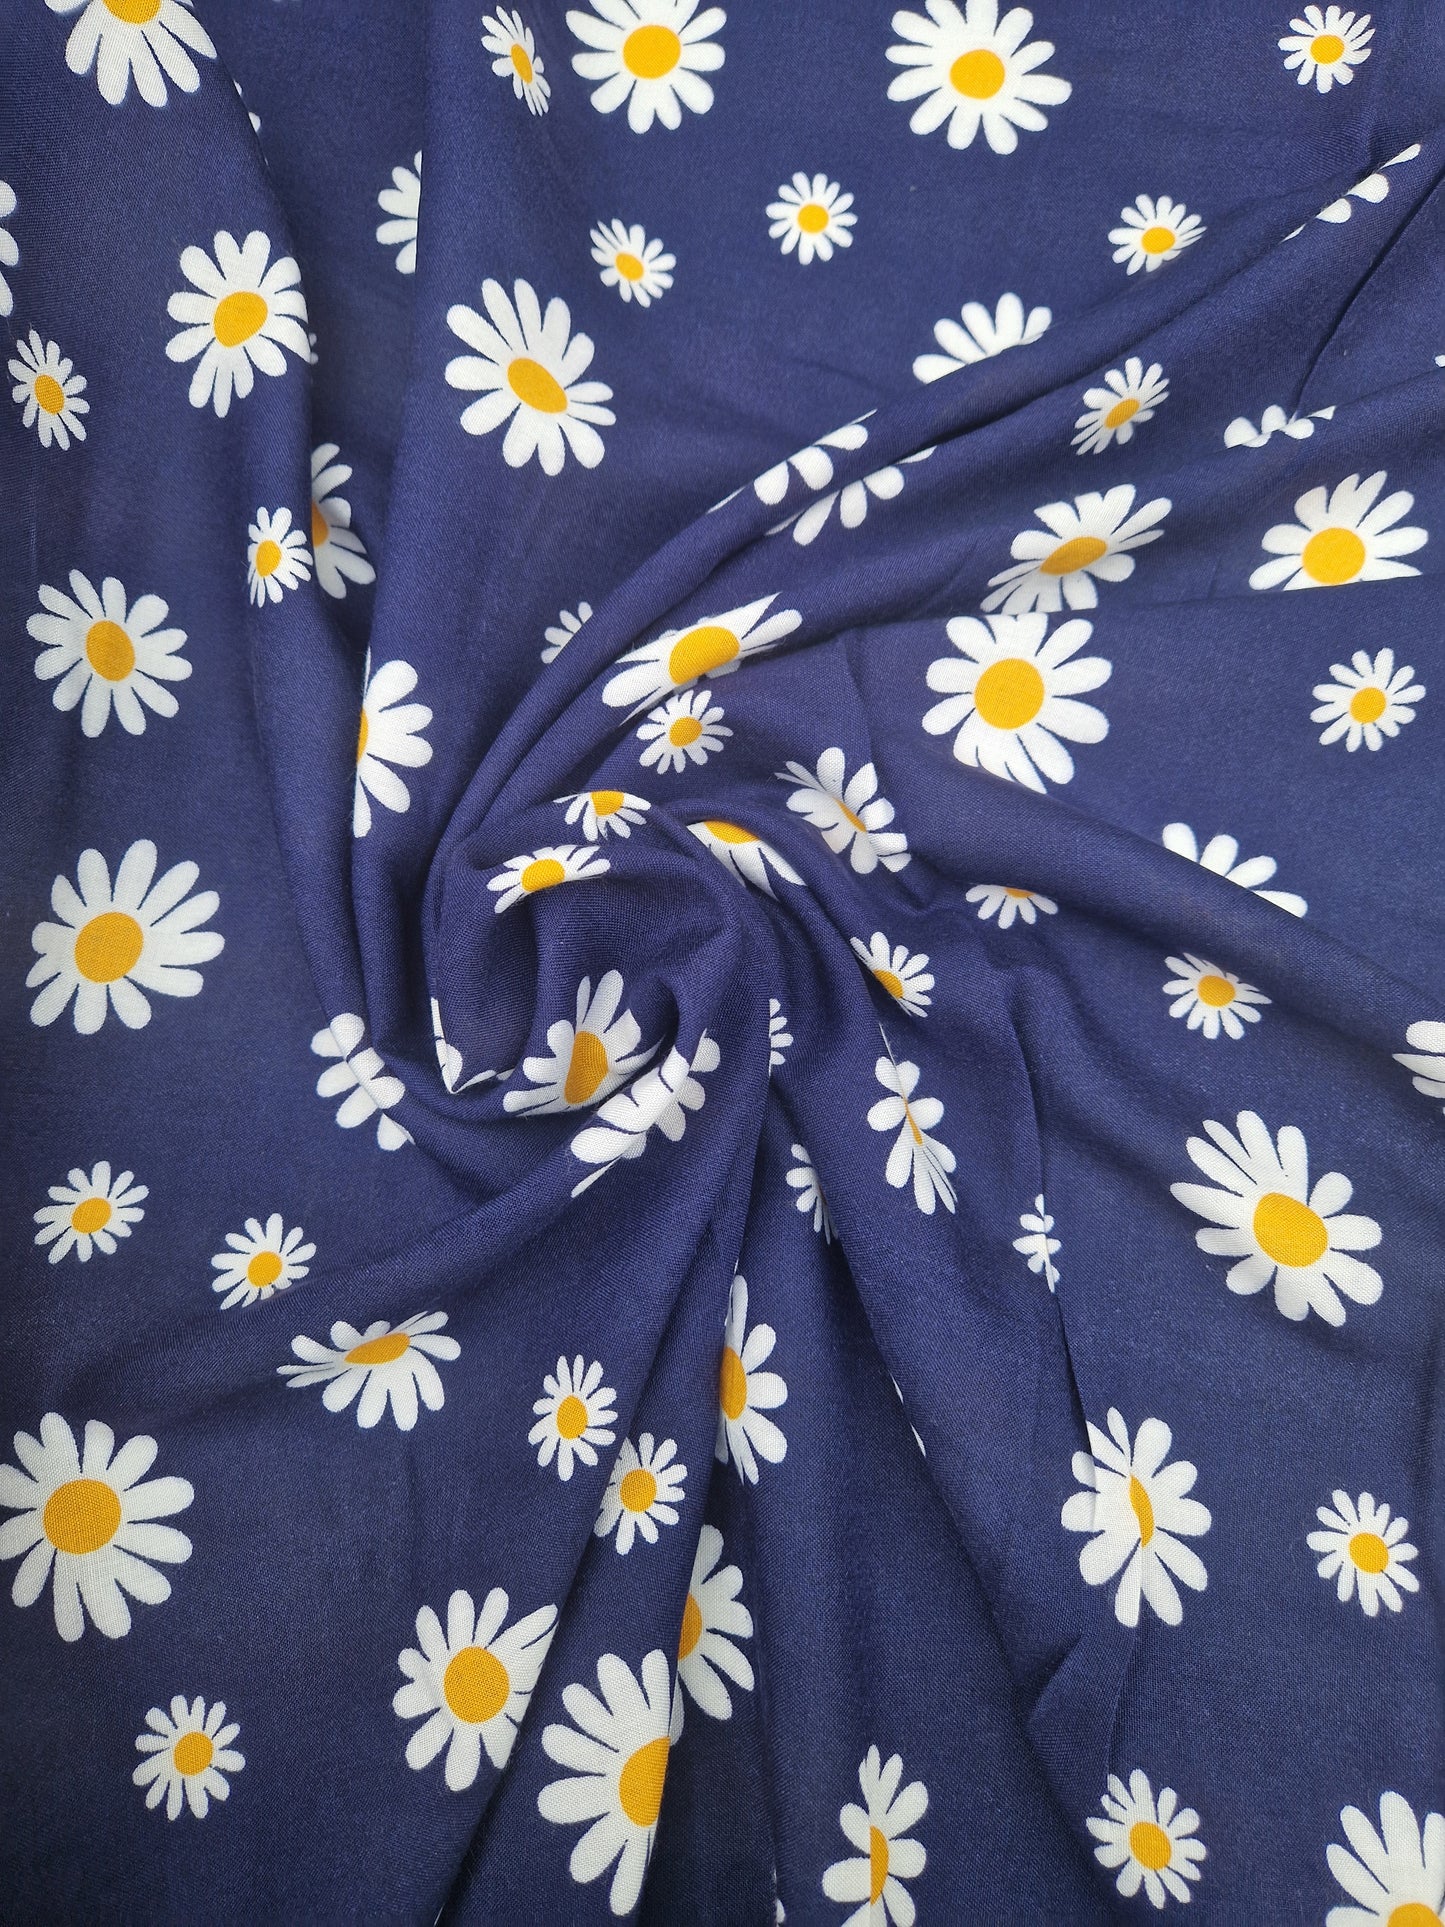 Viscose - navy daisy print 58" wide - Sold by the metre